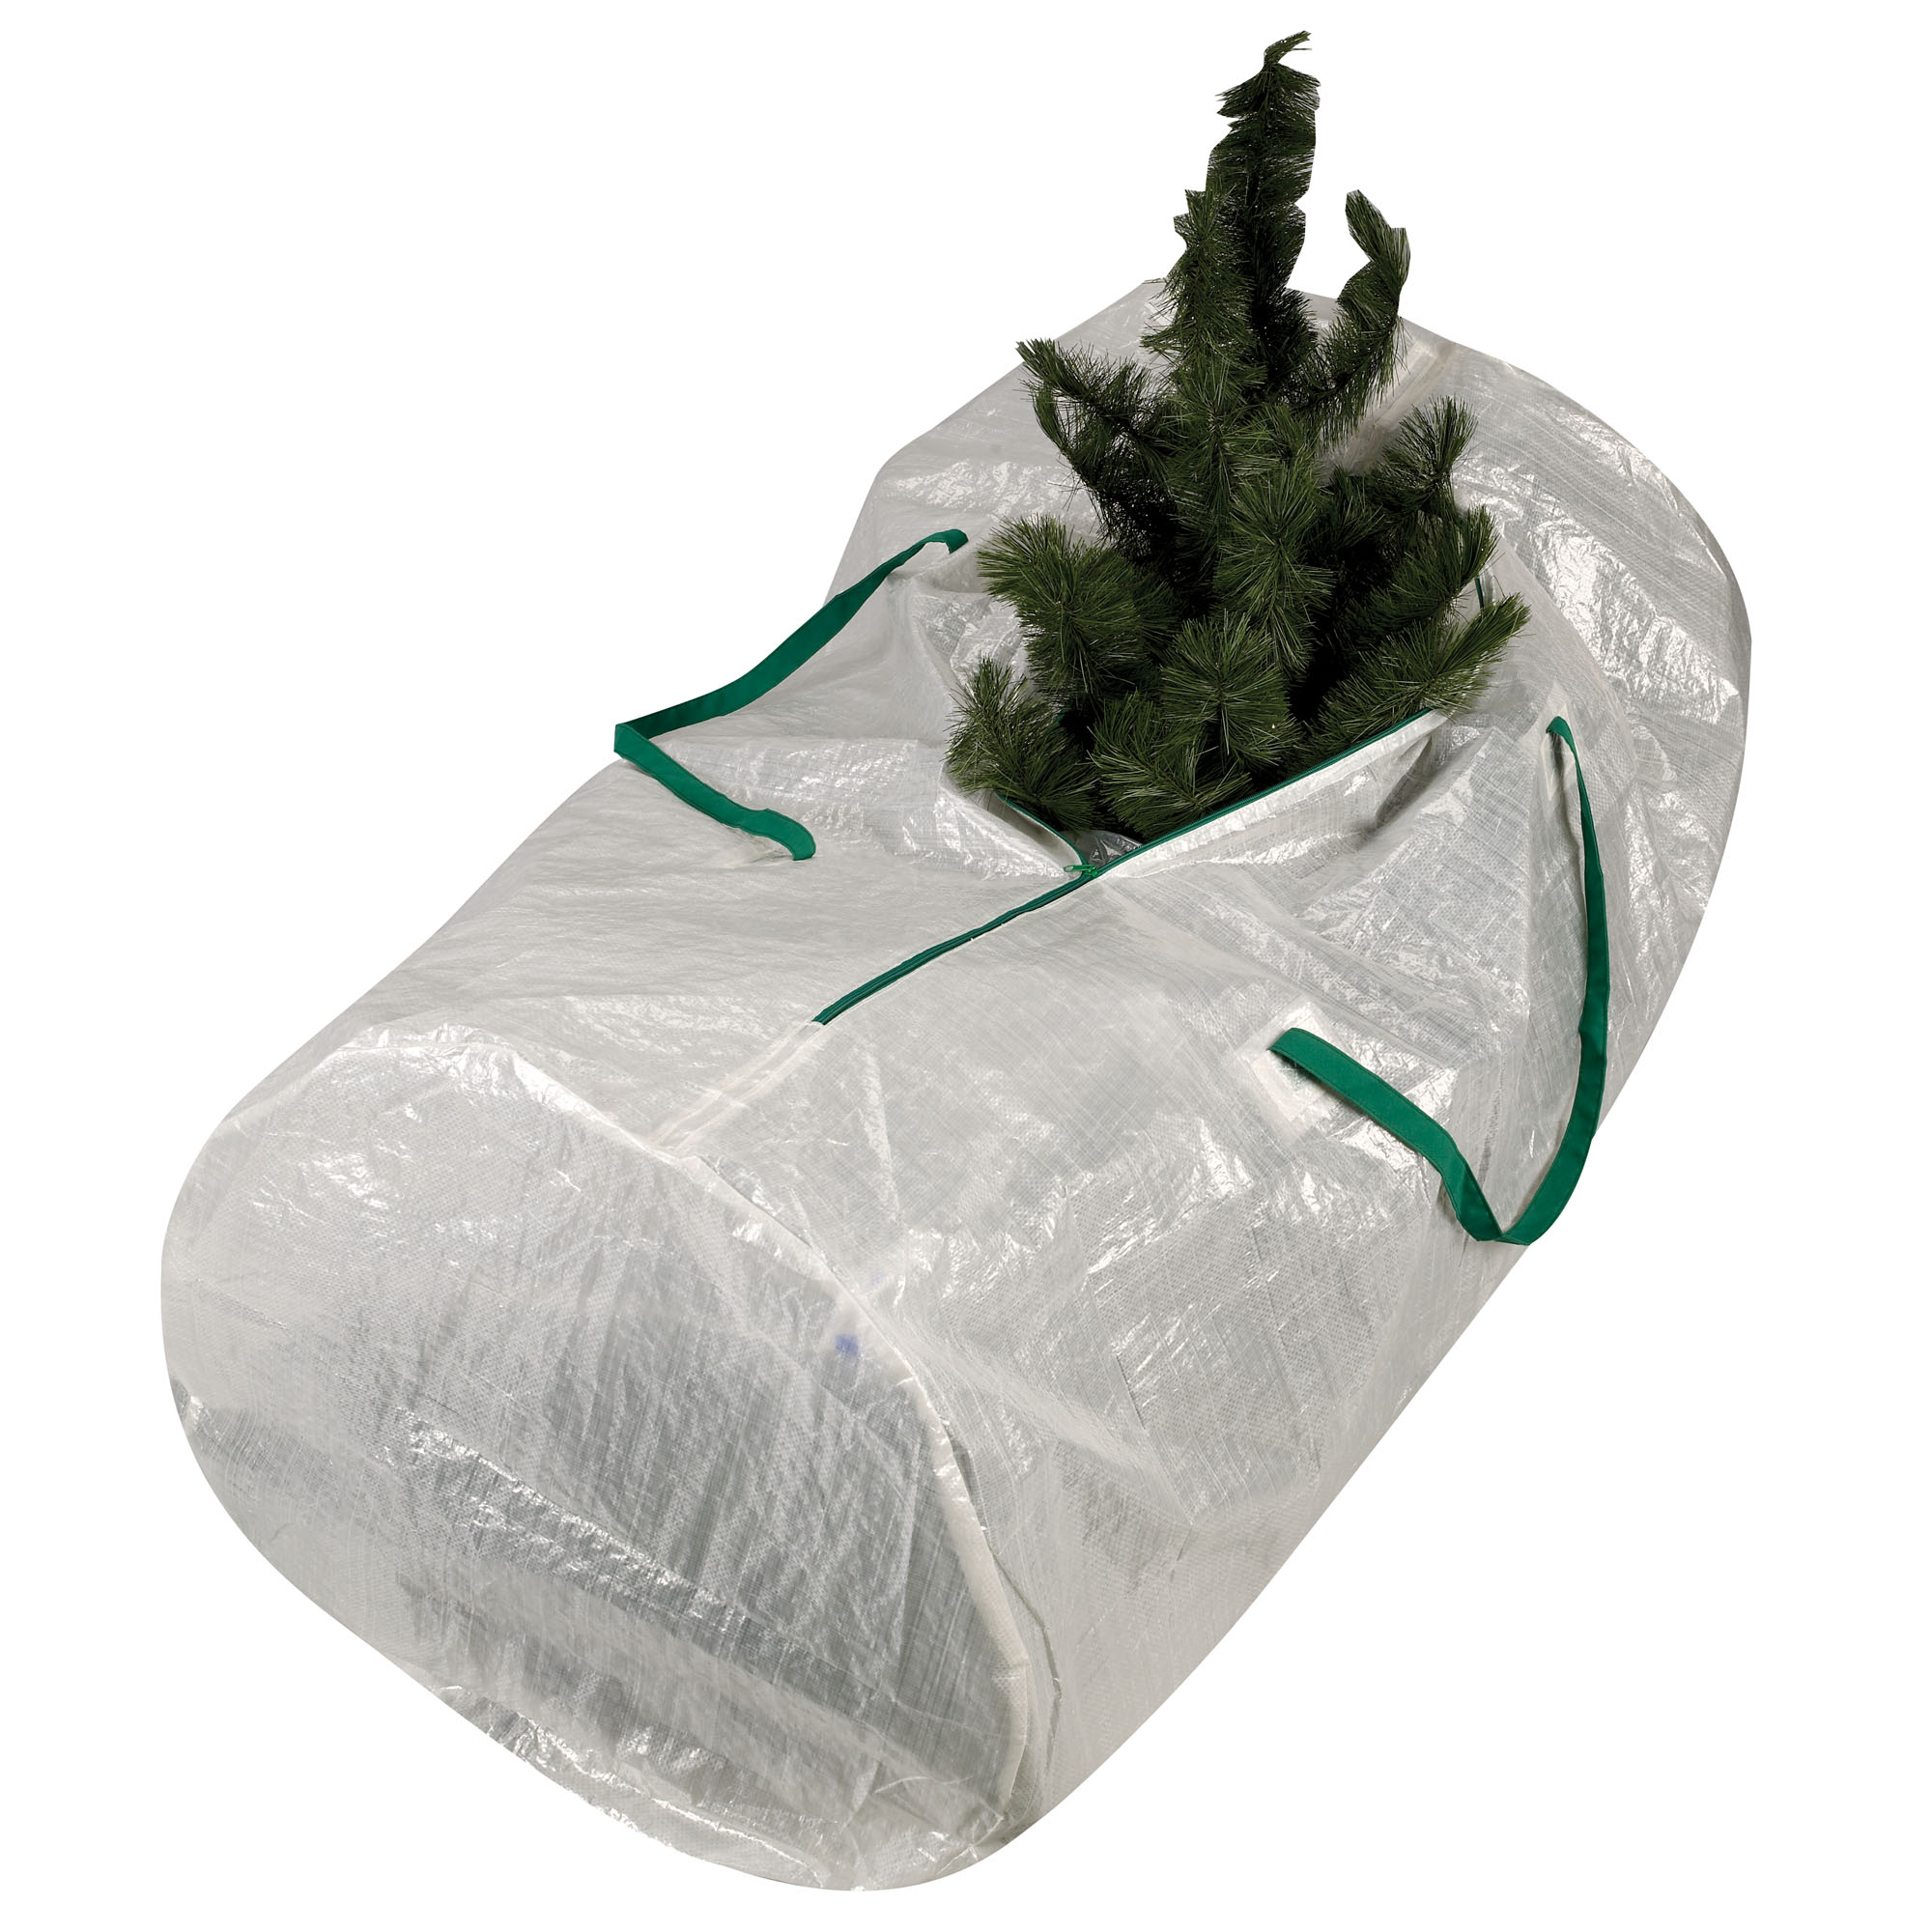 Household Essentials Mighty Stor Translucent Christmas Tree Bag - image 2 of 3